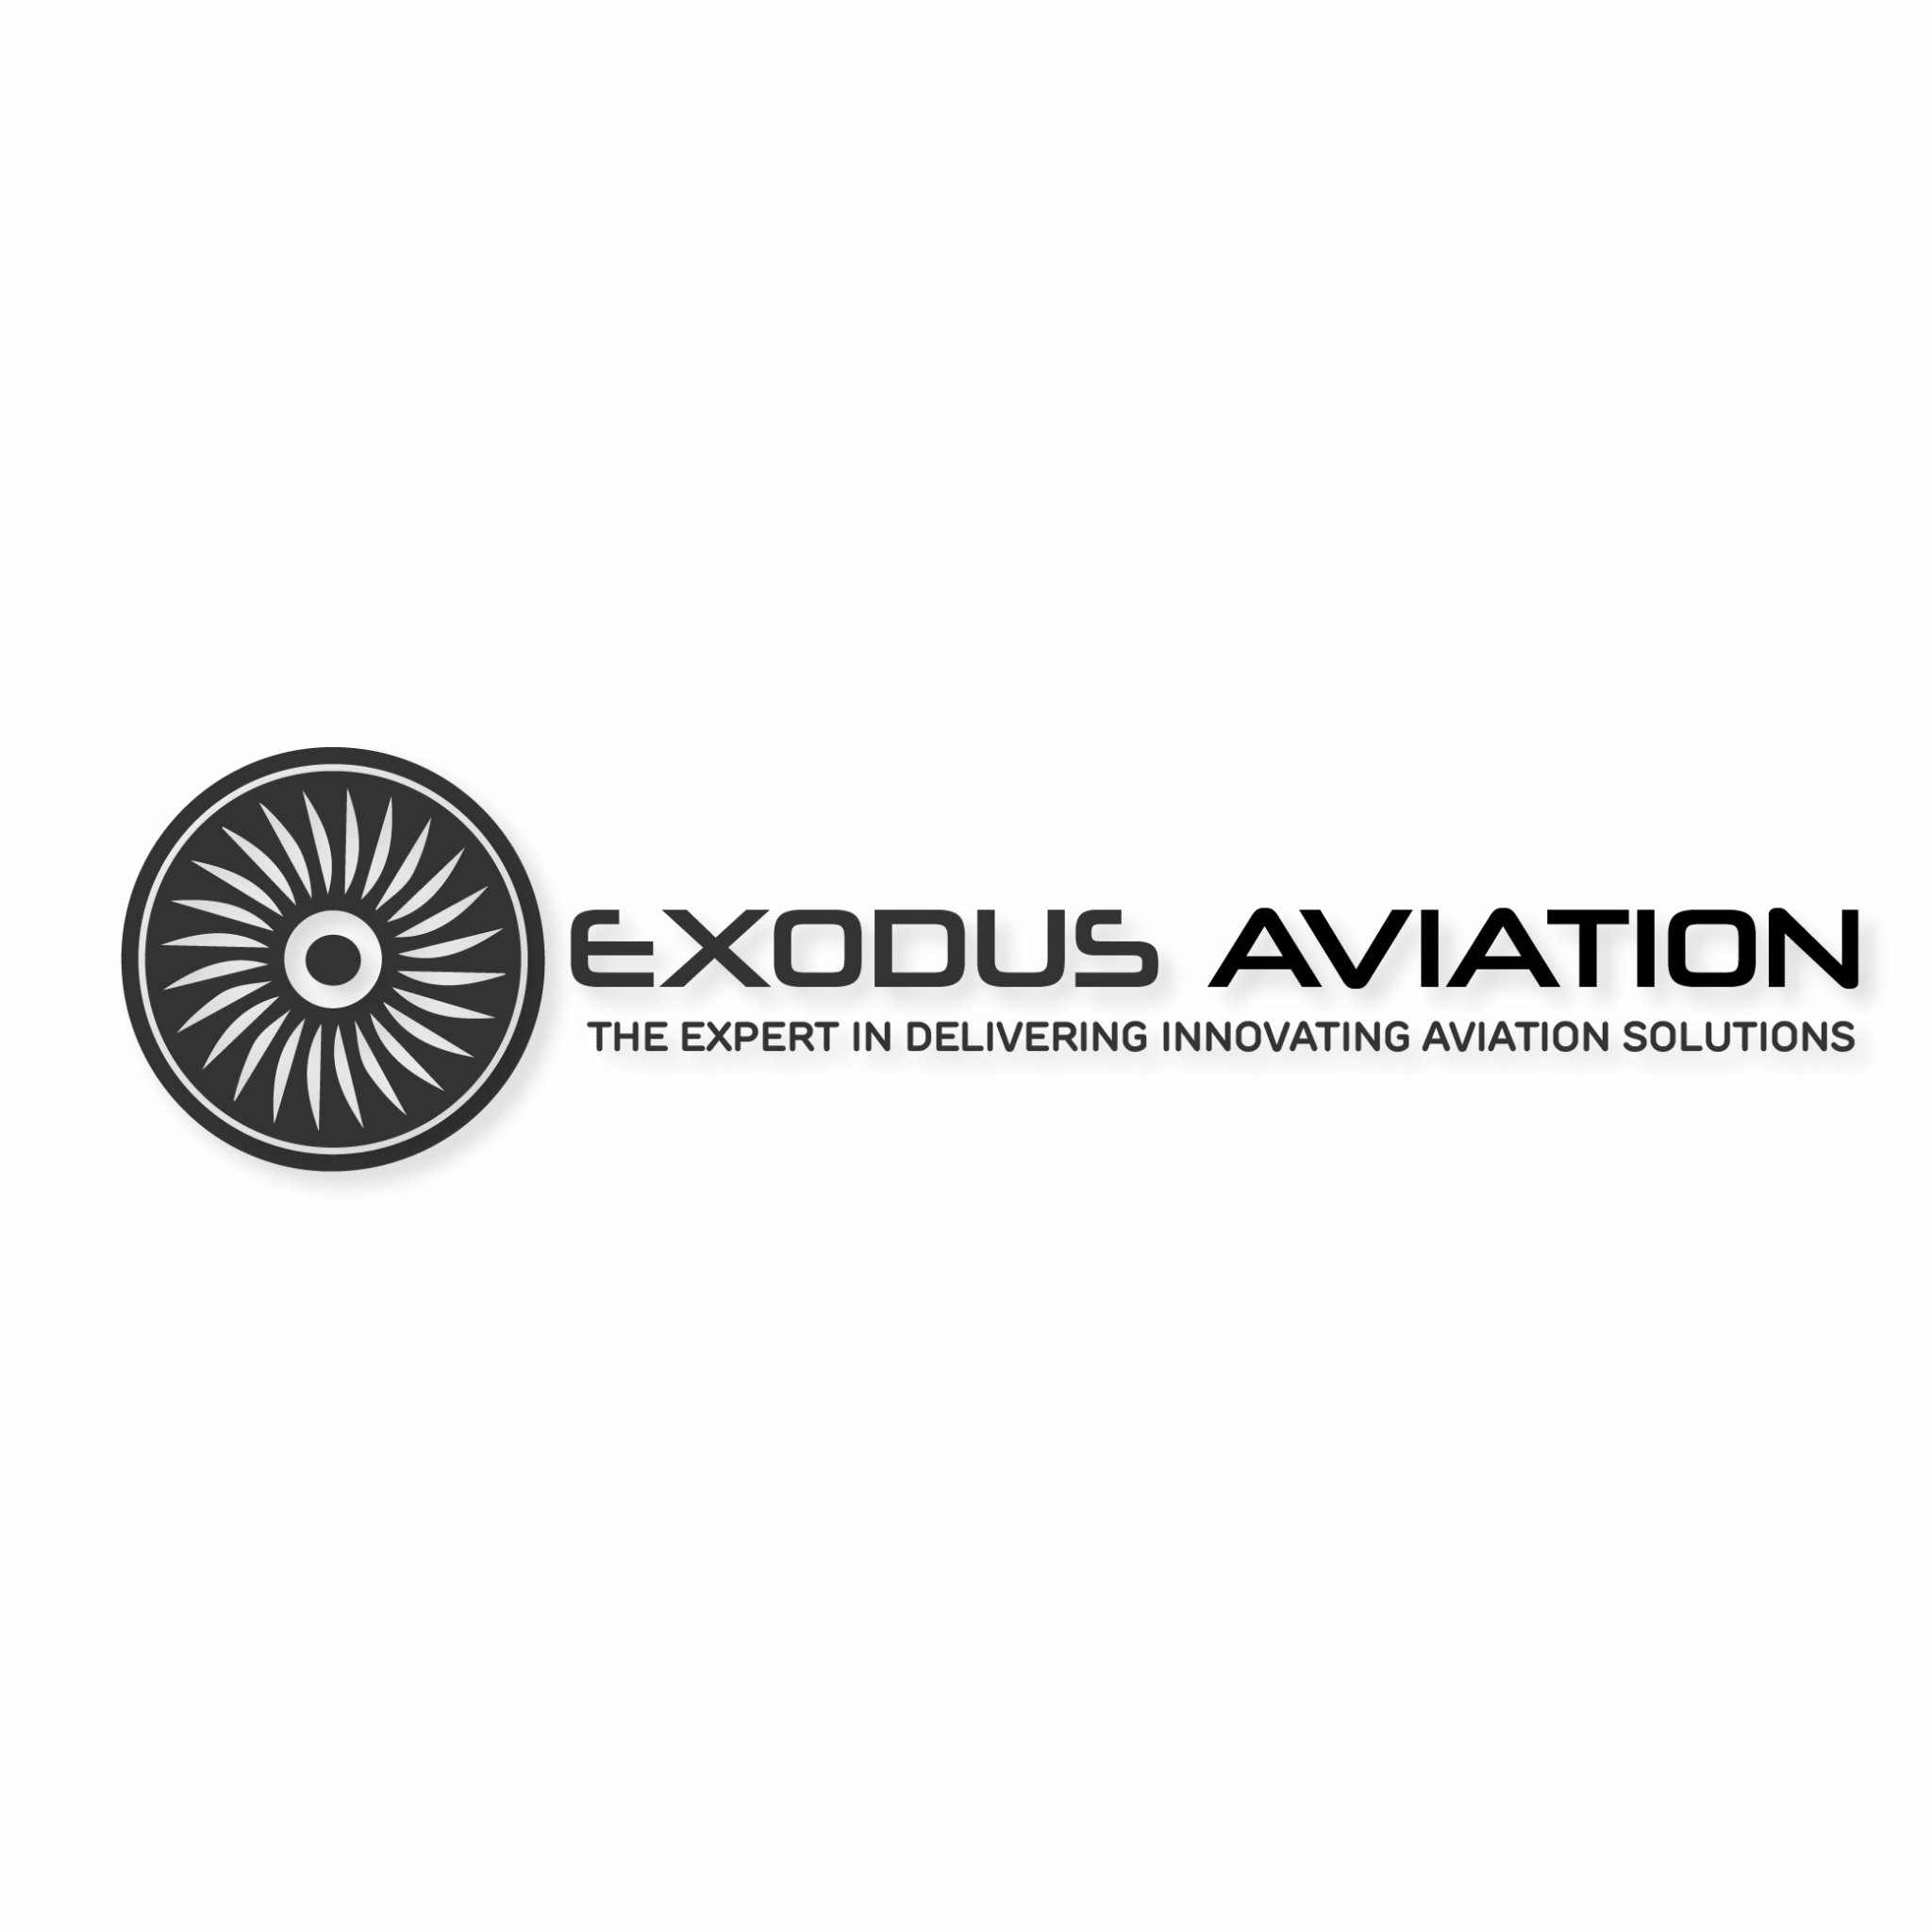 Exodus Aviation is a full service aerospace company providing world wide nose to tail component support for airframes and engines.